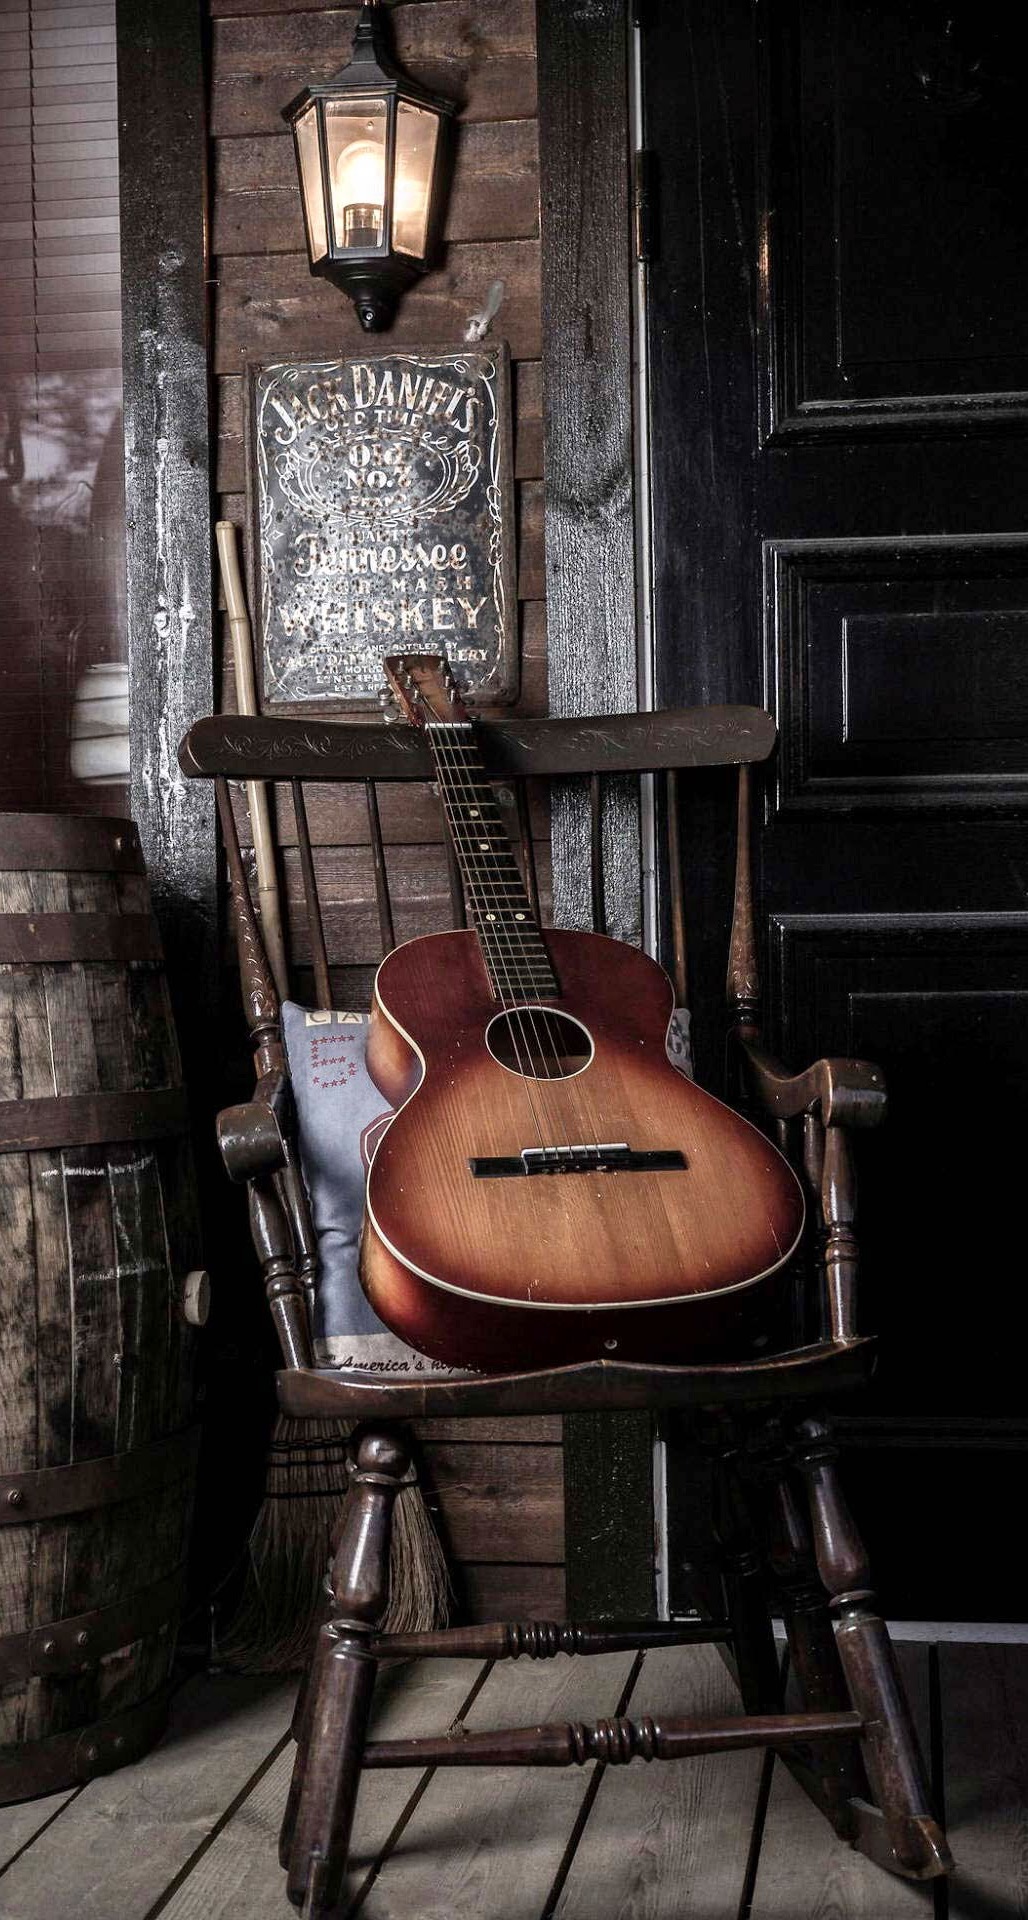 Old-Guitar-On-Chair-iPhone-6-Plus-HD-Wallpaper.